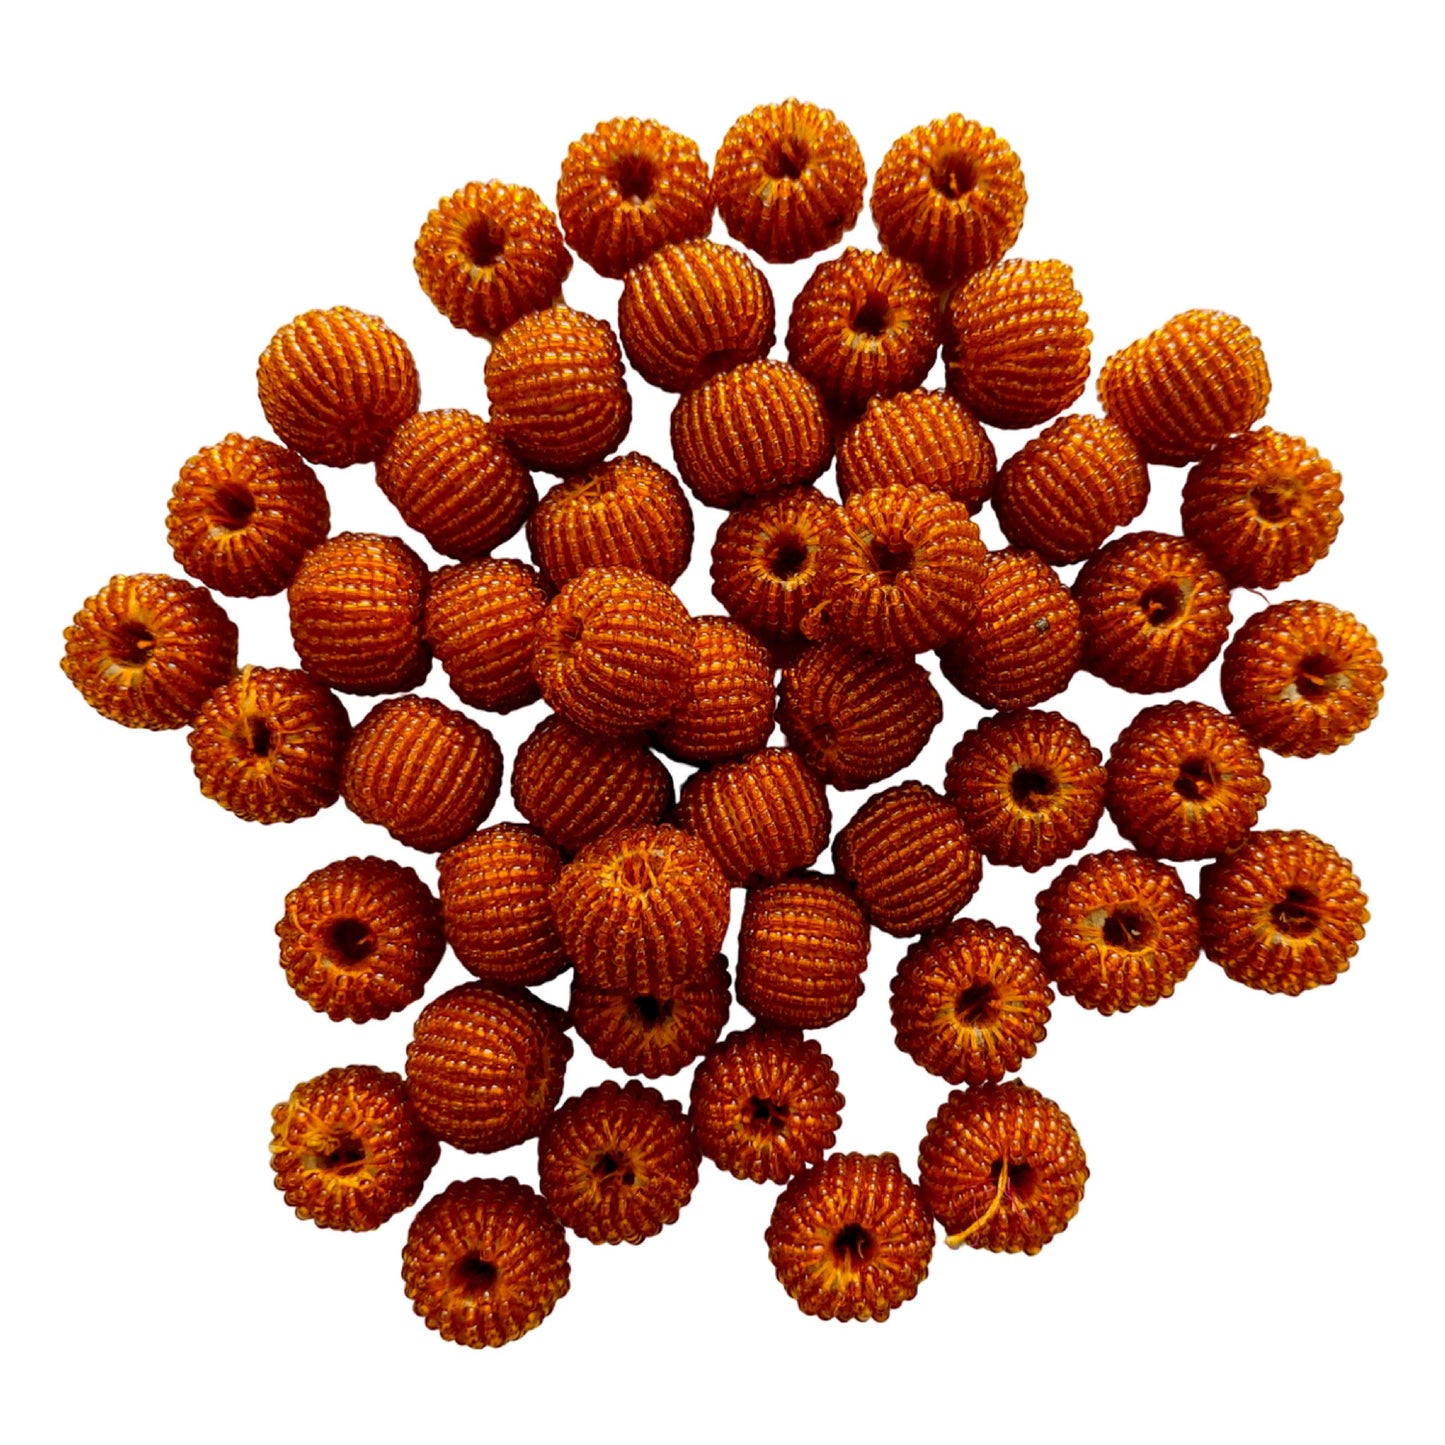 Indian Petals Cheed Ball Motif for Rakhi, Jewelry making, Craft or Decor, 14mm